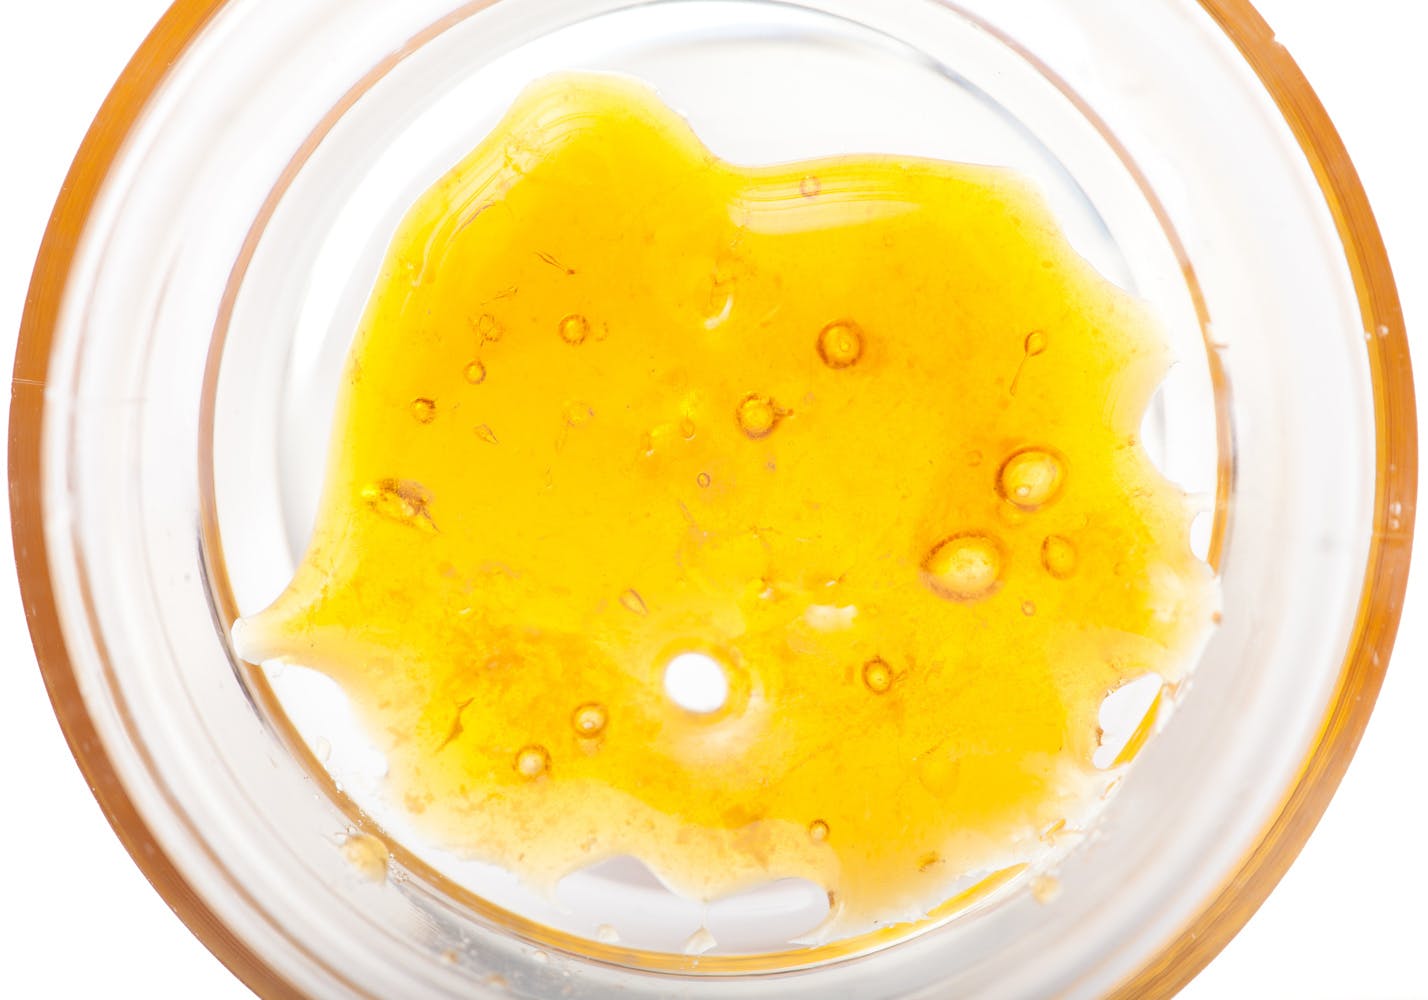 concentrate-chem-d-live-resin-incredible-extracts